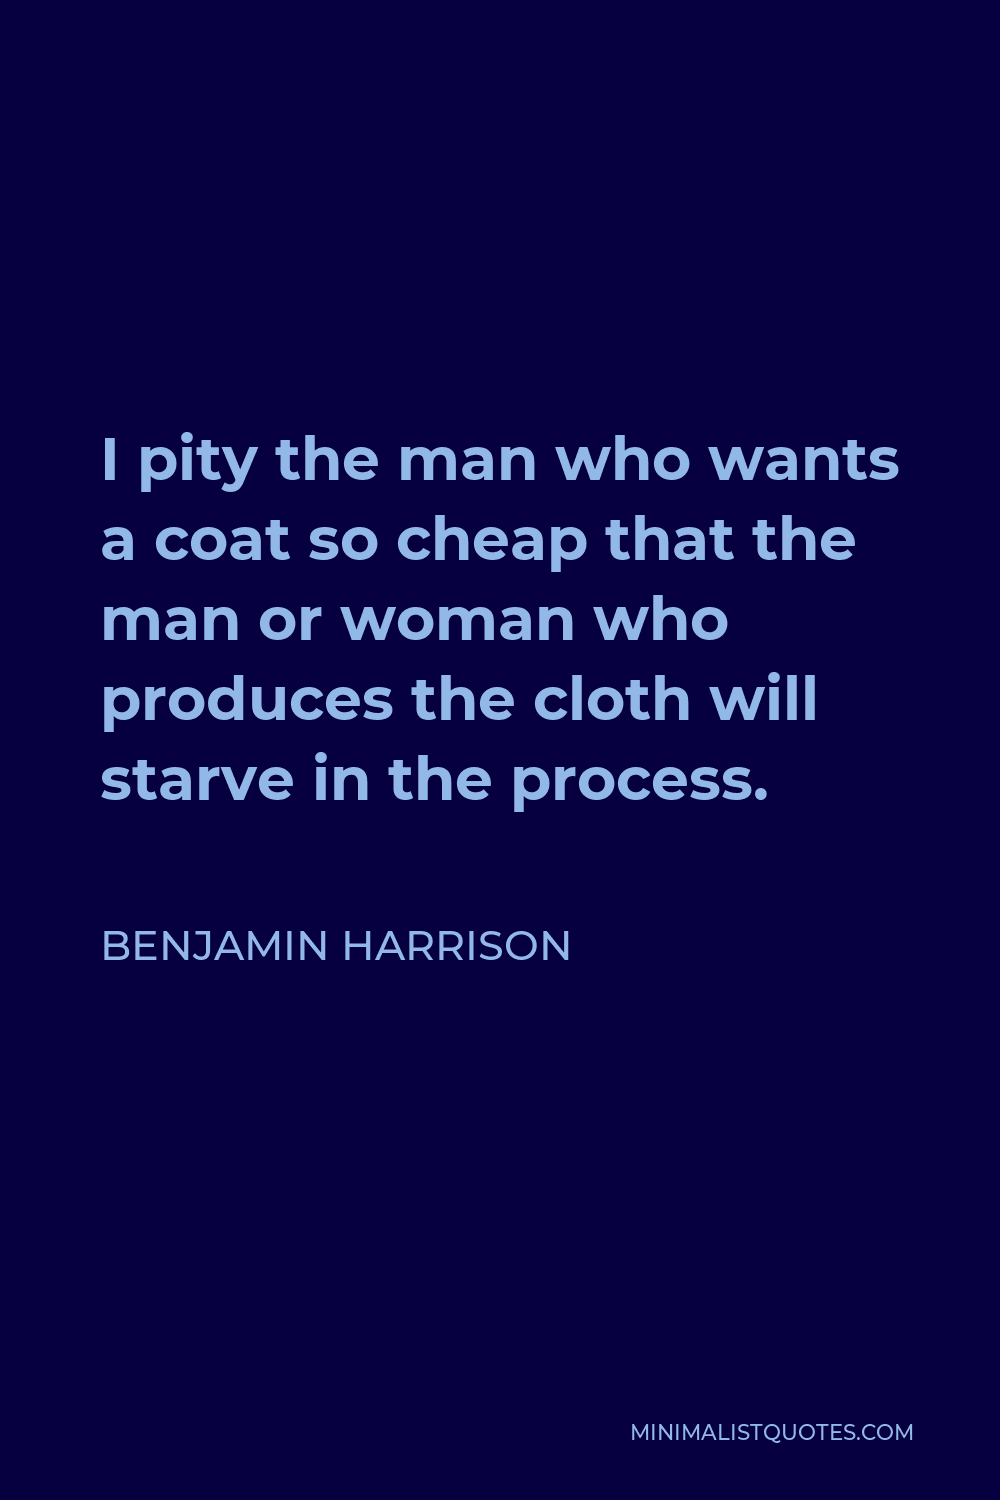 Benjamin Harrison Quote - I pity the man who wants a coat so cheap that the man or woman who produces the cloth will starve in the process.